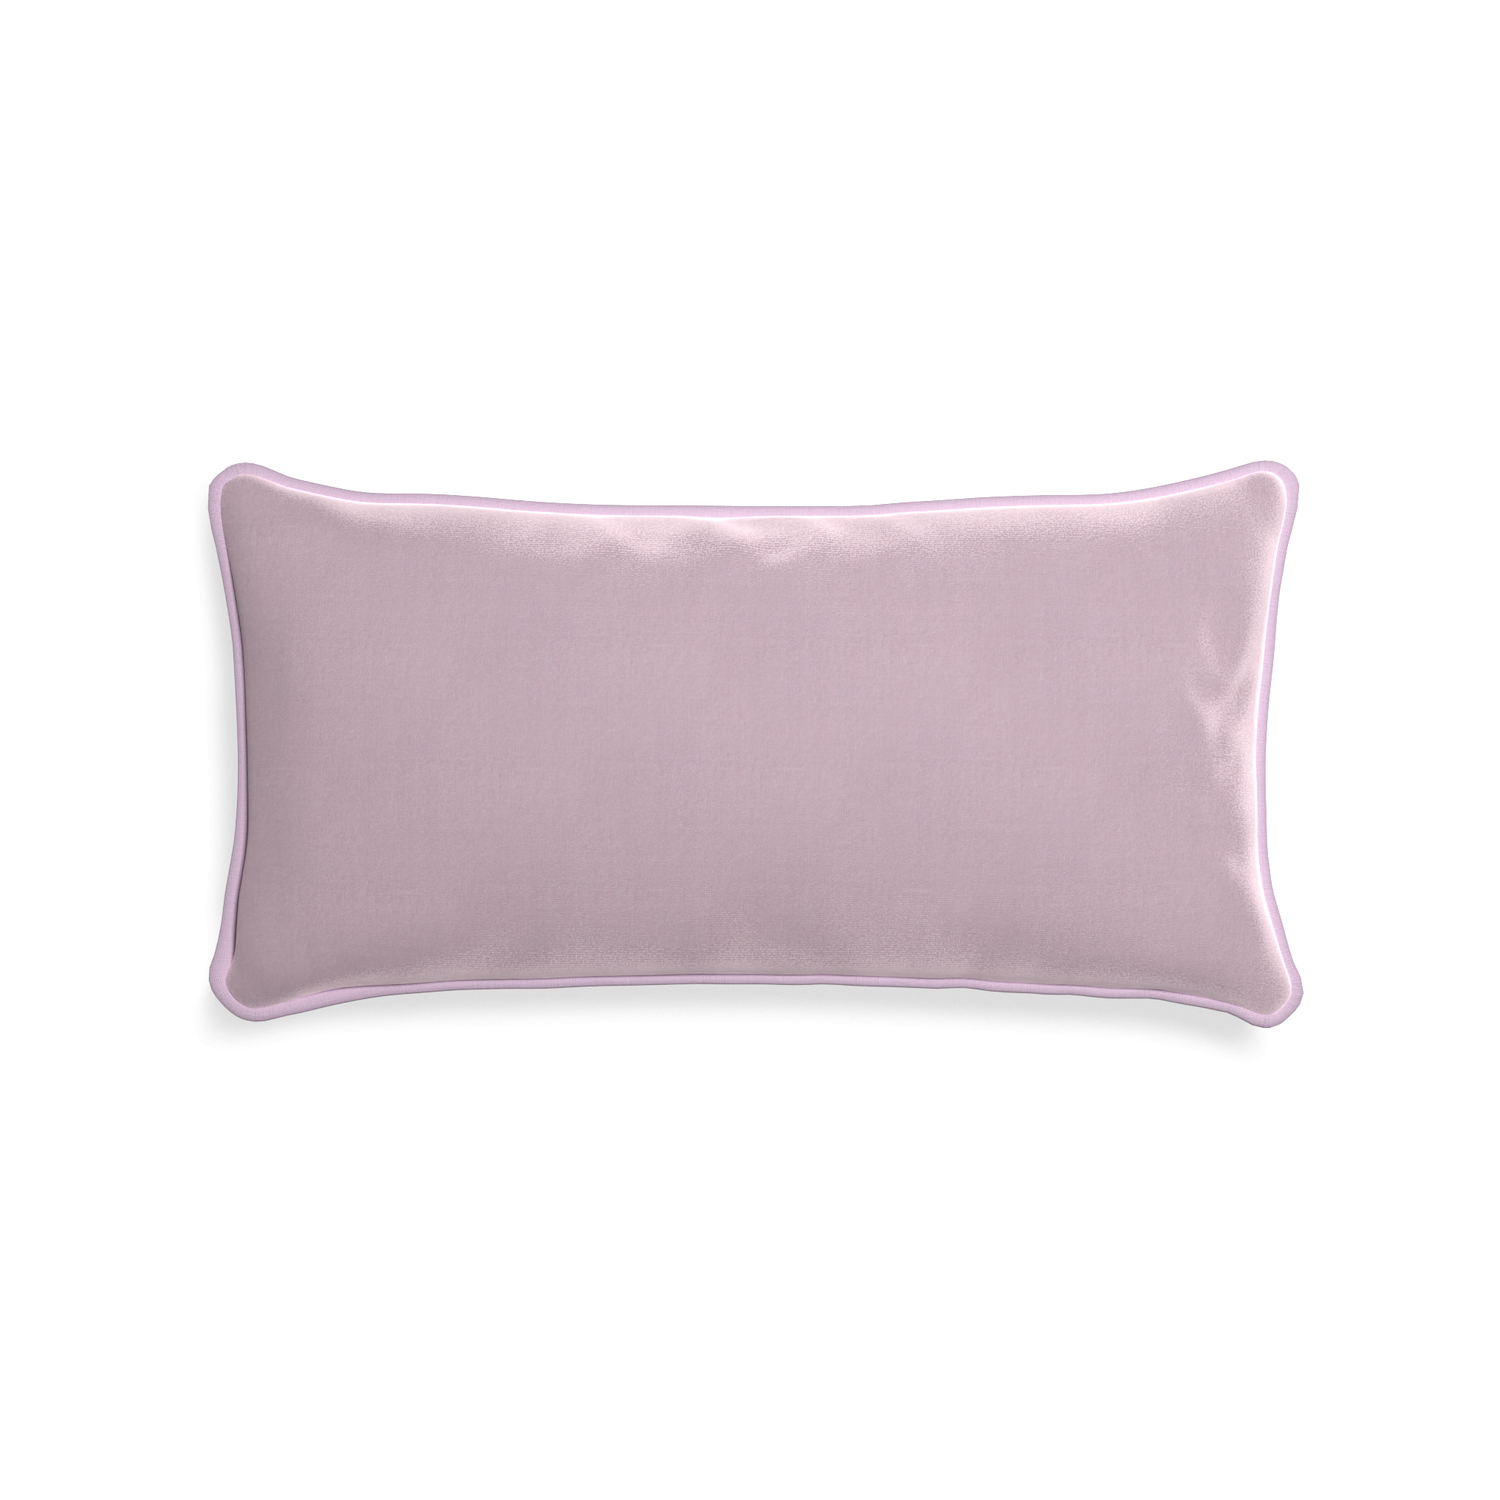 Midi-lumbar lilac velvet custom lilacpillow with l piping on white background